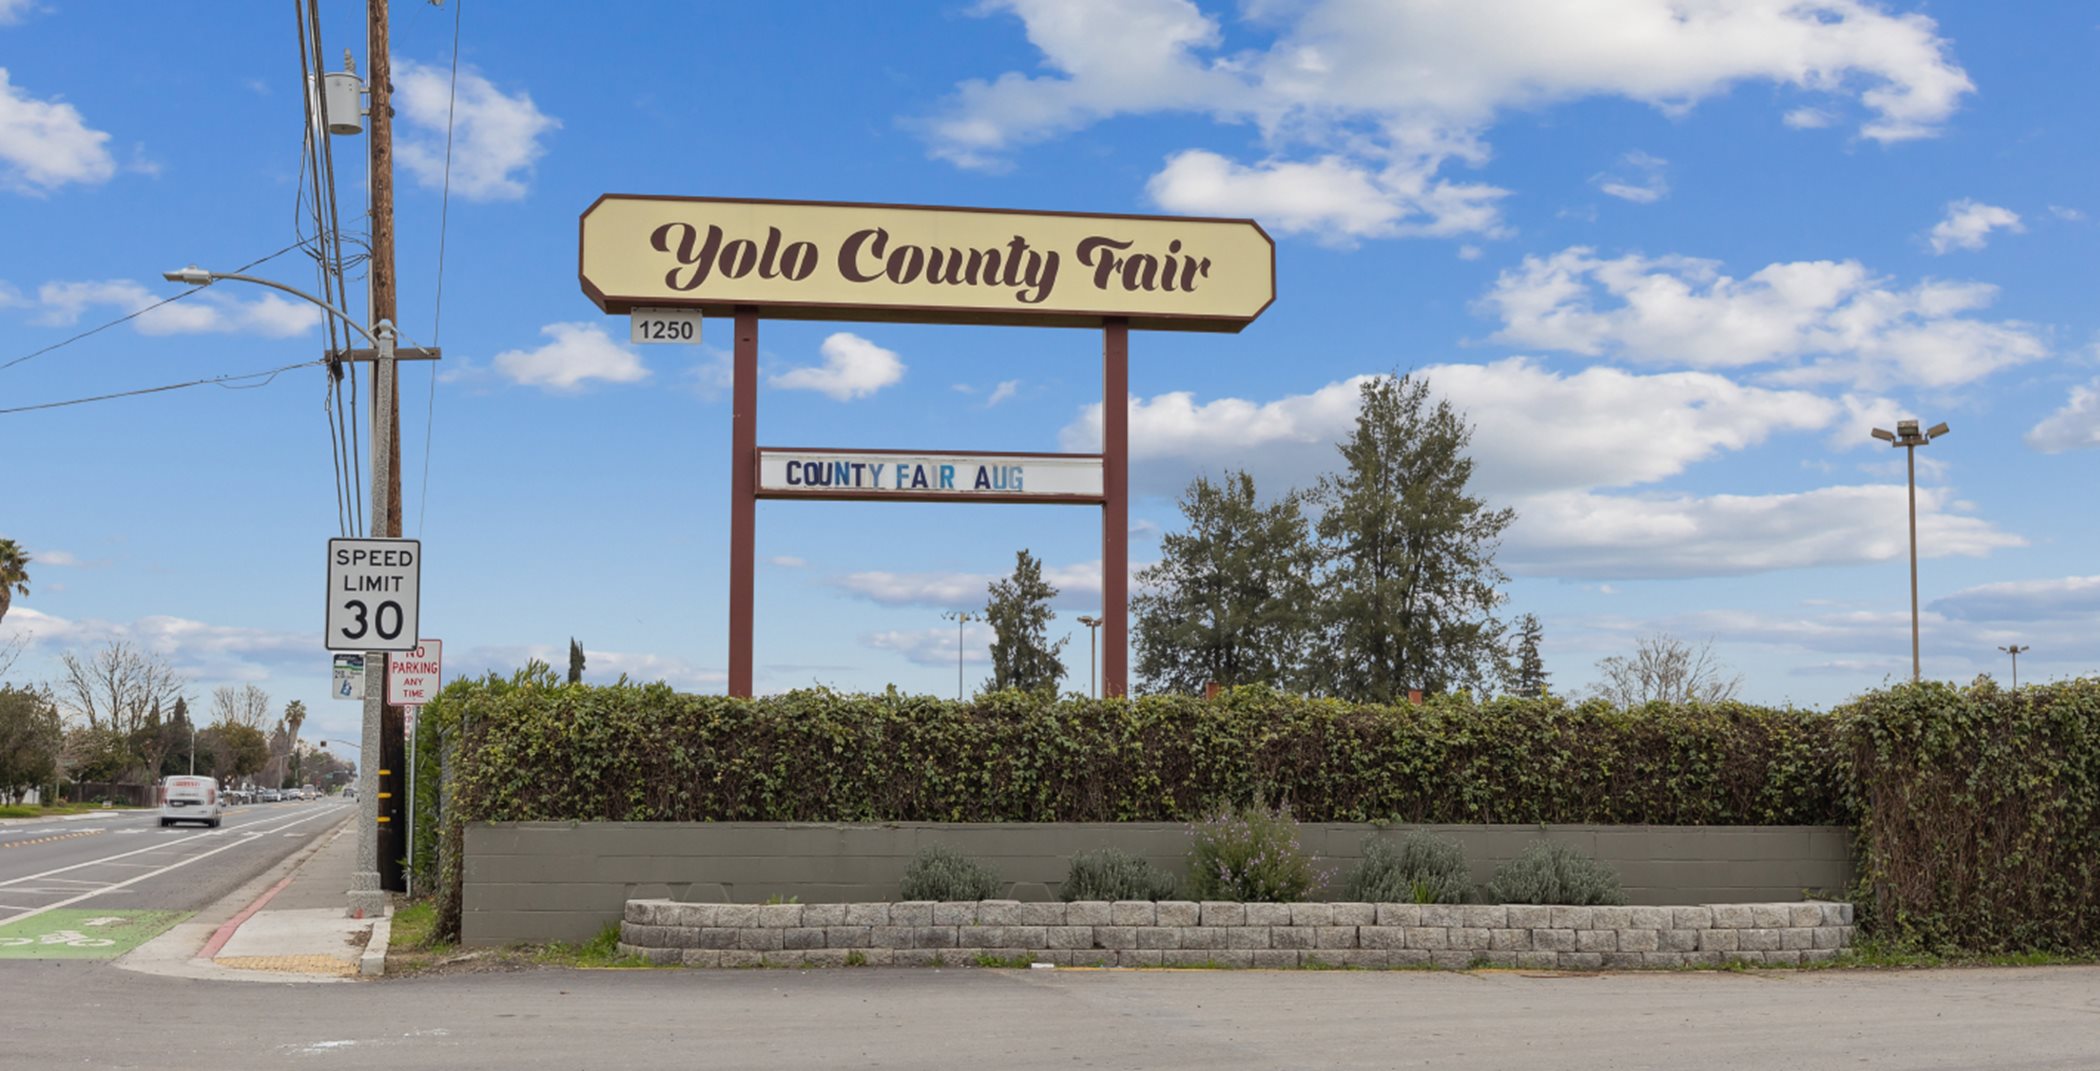 The Yolo County Fairgrounds monument sign